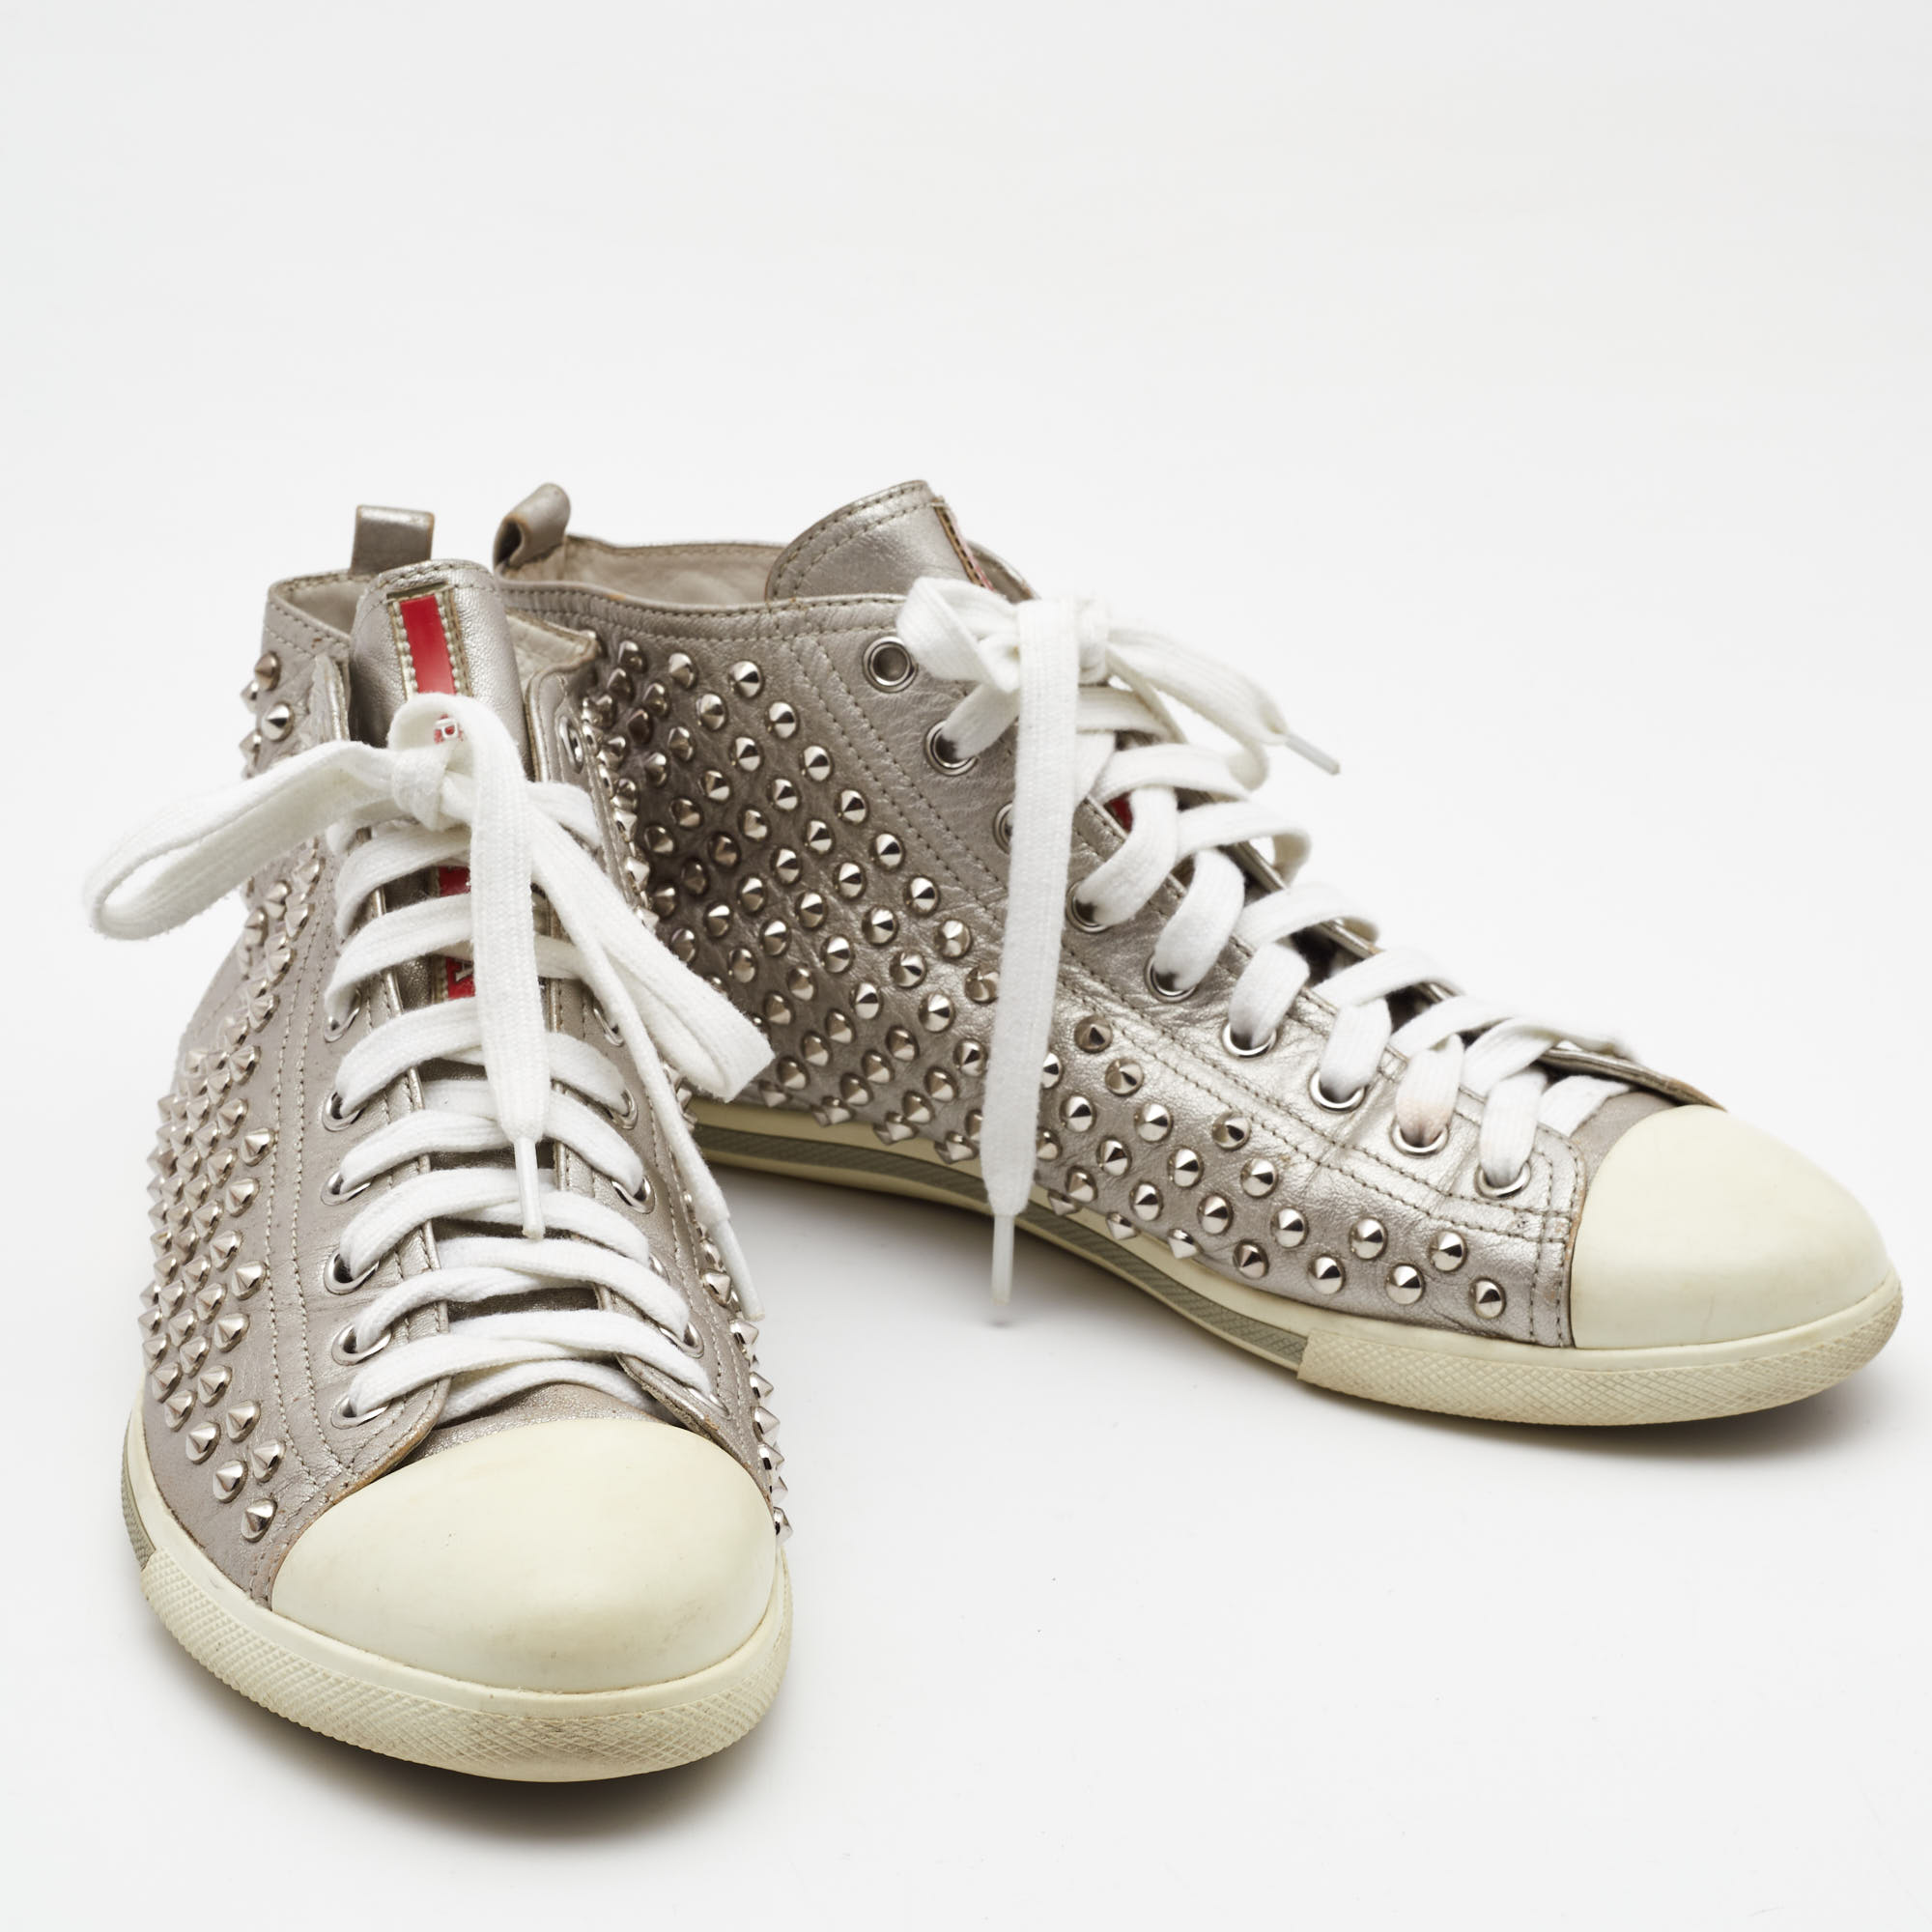 Prada Silver Leather Stud High Top Sneakers Size 40